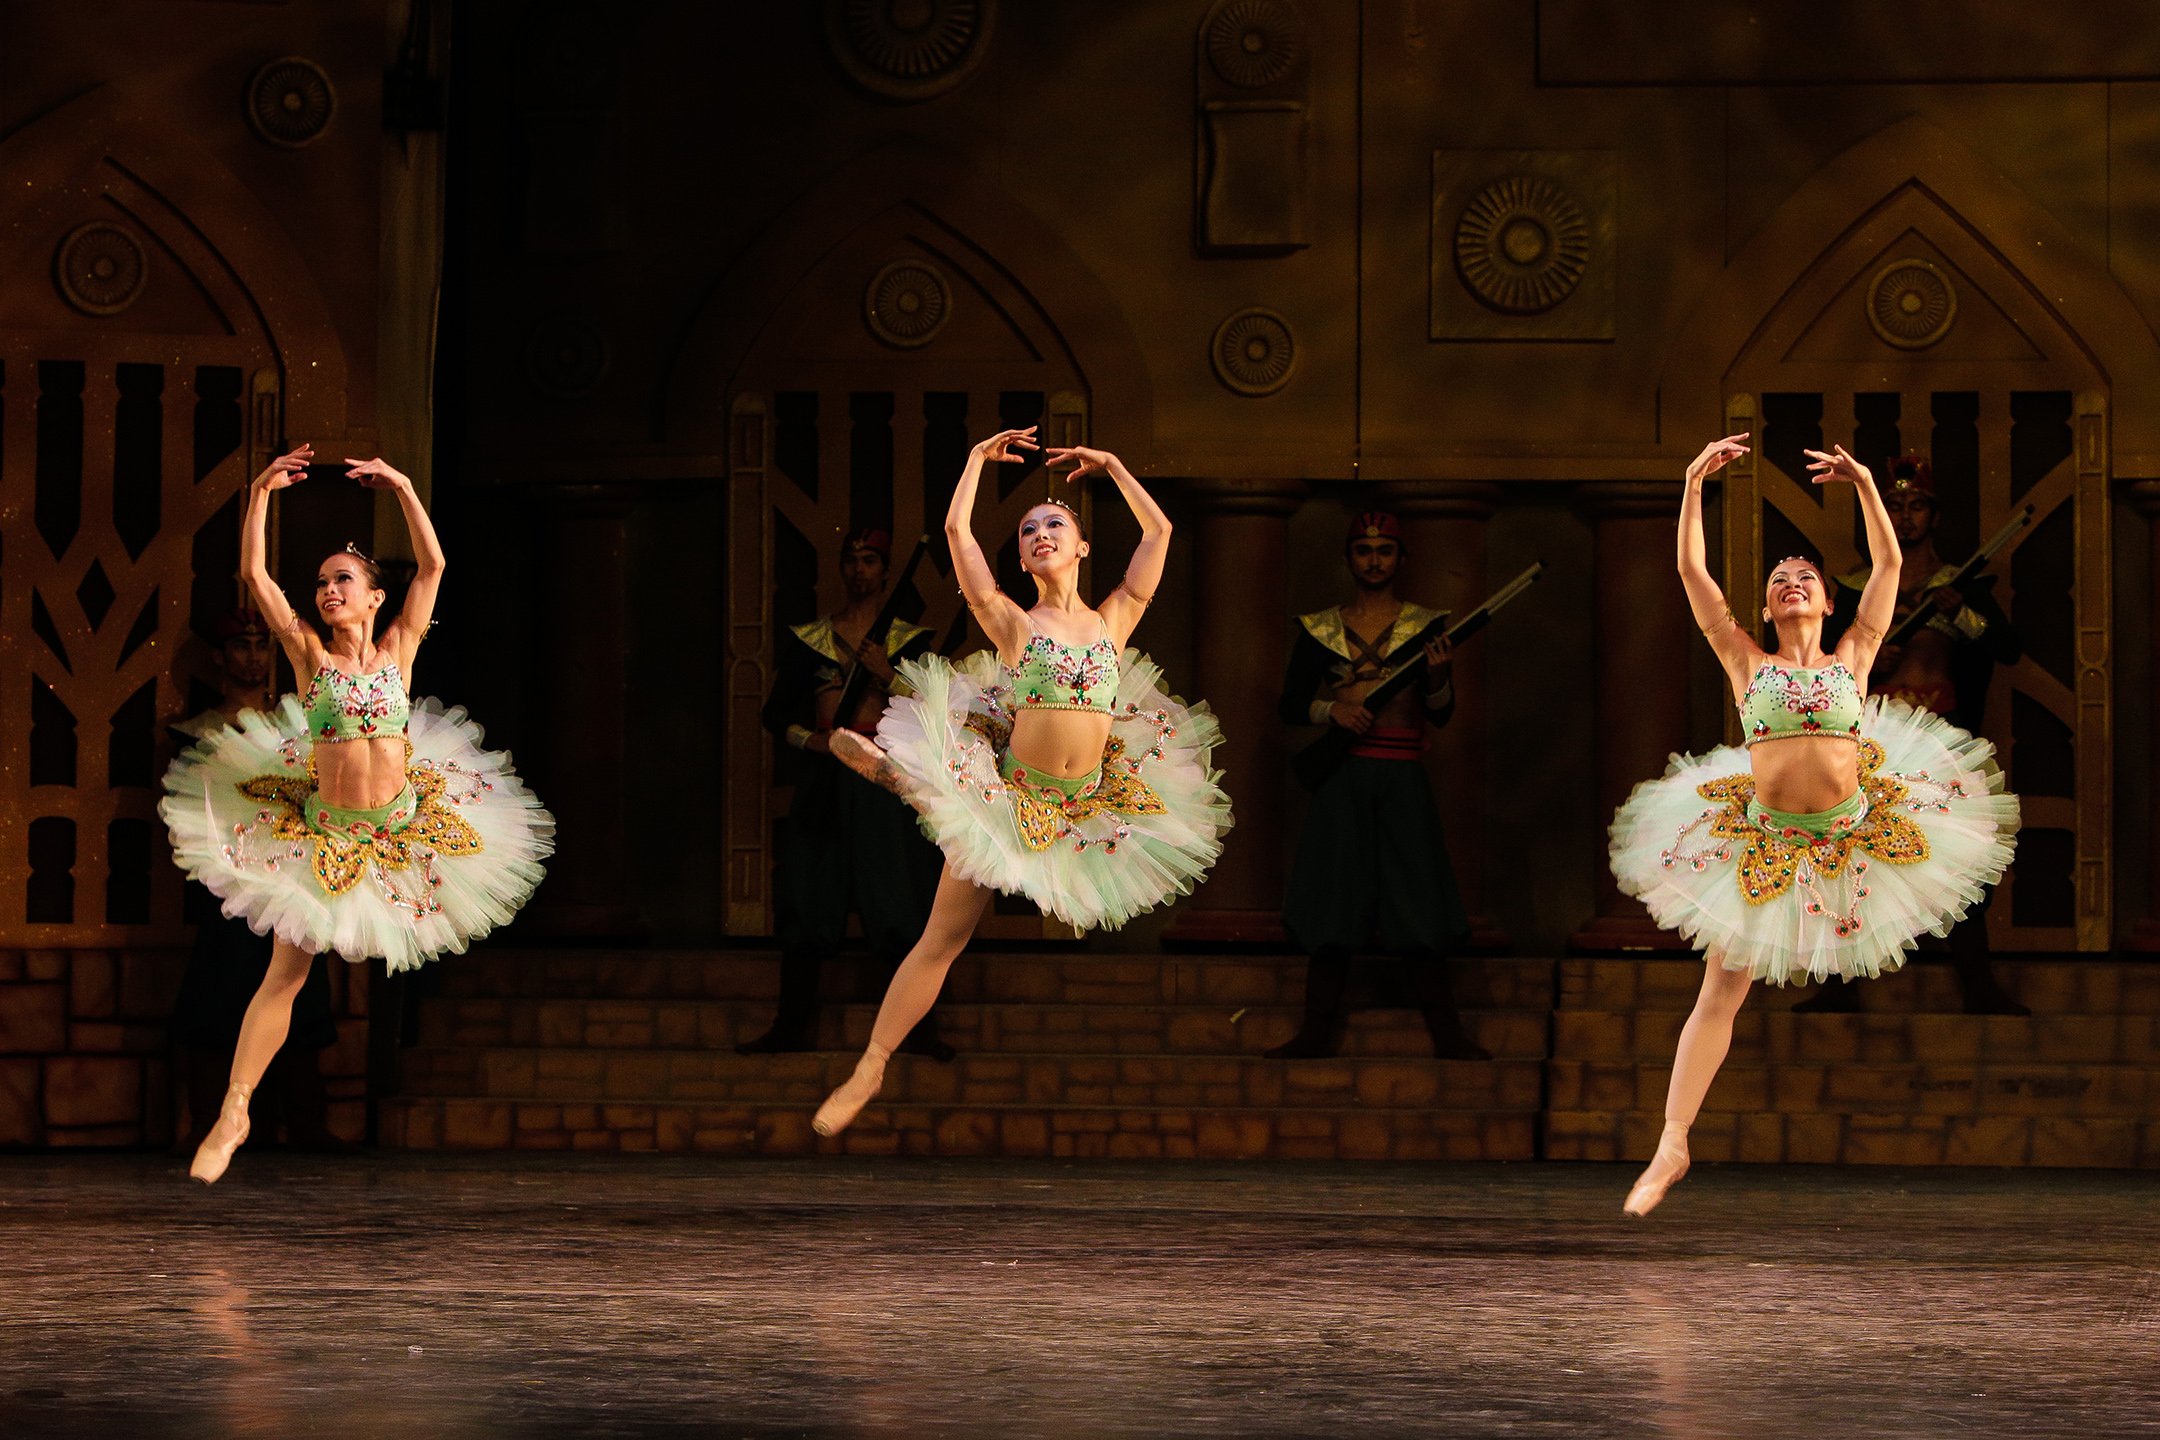    The Odalisques – Naomi Jaena, Jung Wong Shin and Sofia Sangco-Peralta – joyfully move as one in  Le Corsaire  (2013), wearing midriff-baring tutus in mint green flecked with beads, baubles and sequins. Photo by Jojo Mamangun   